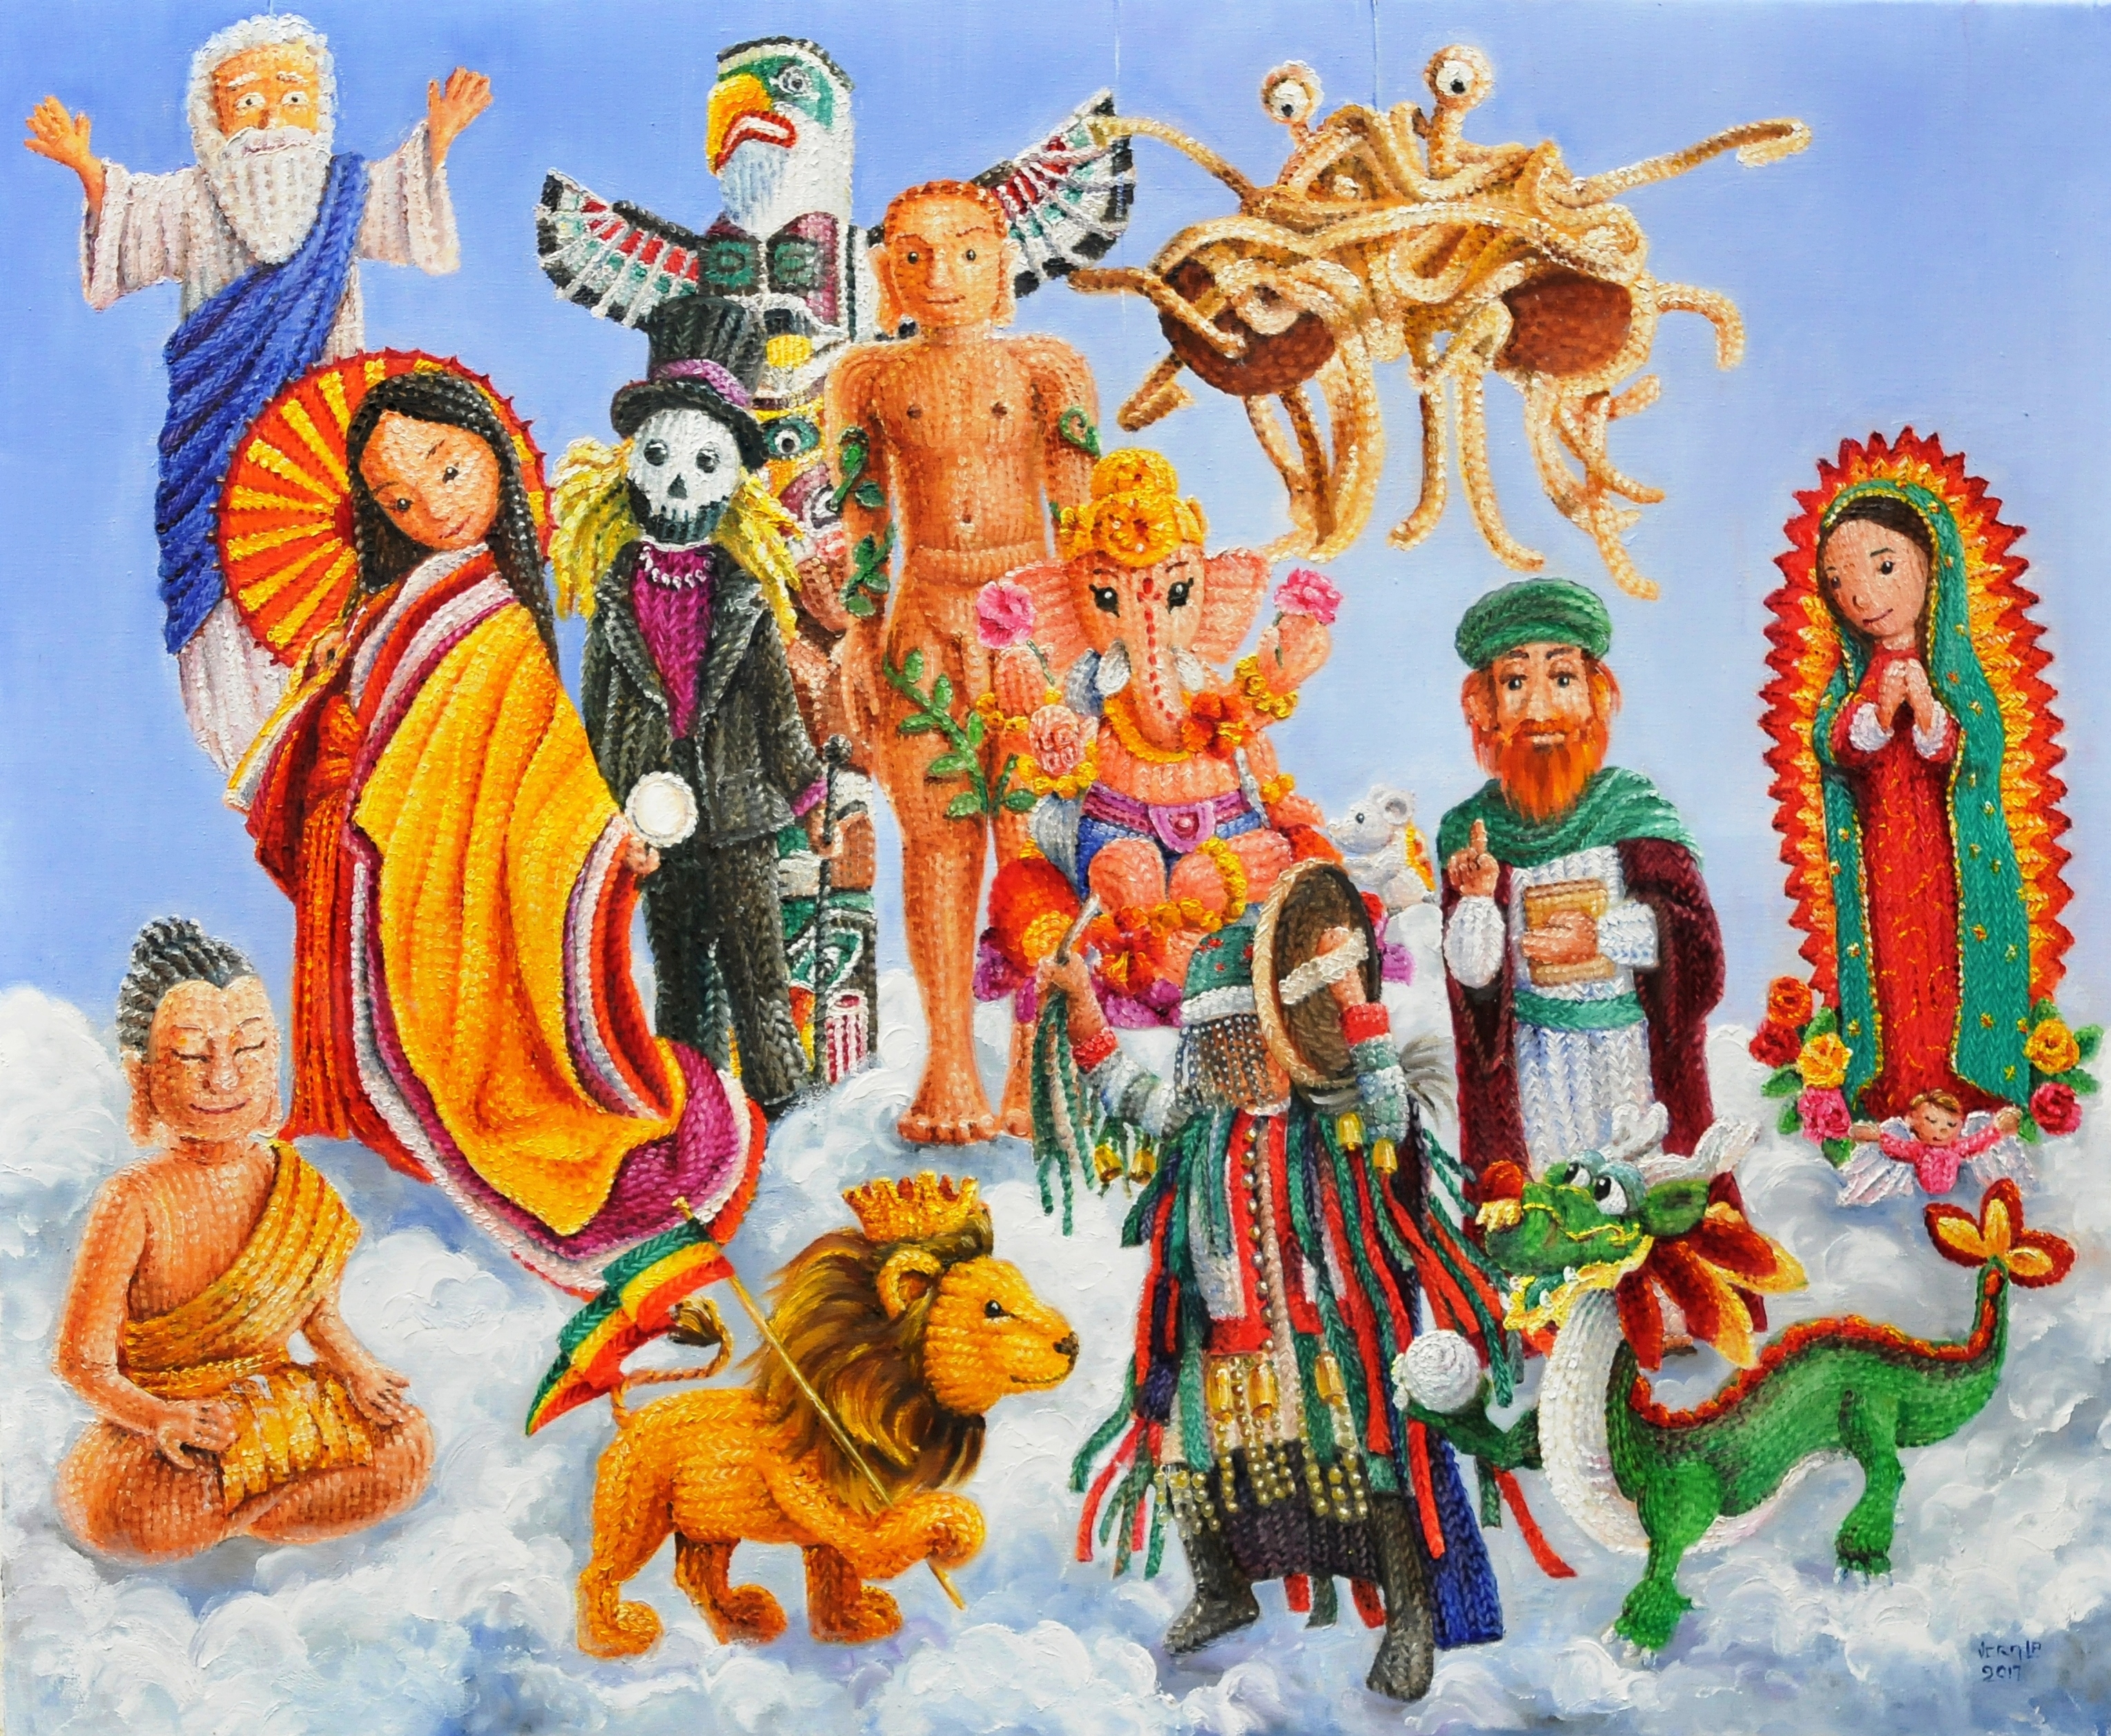 Knitted and crochet religeous puppets (JHWH, totempaal, Spagettimonster,Amaterasu, Baron Samedi, Jain profeet, Ganesha, Onze lieve Vrouw van Guadeloup, Buda, Leeuw van zion, Sjamaan, Chinese draak) | Oil paint on linen | Year: 2017 | Dimensions: 90x110cm